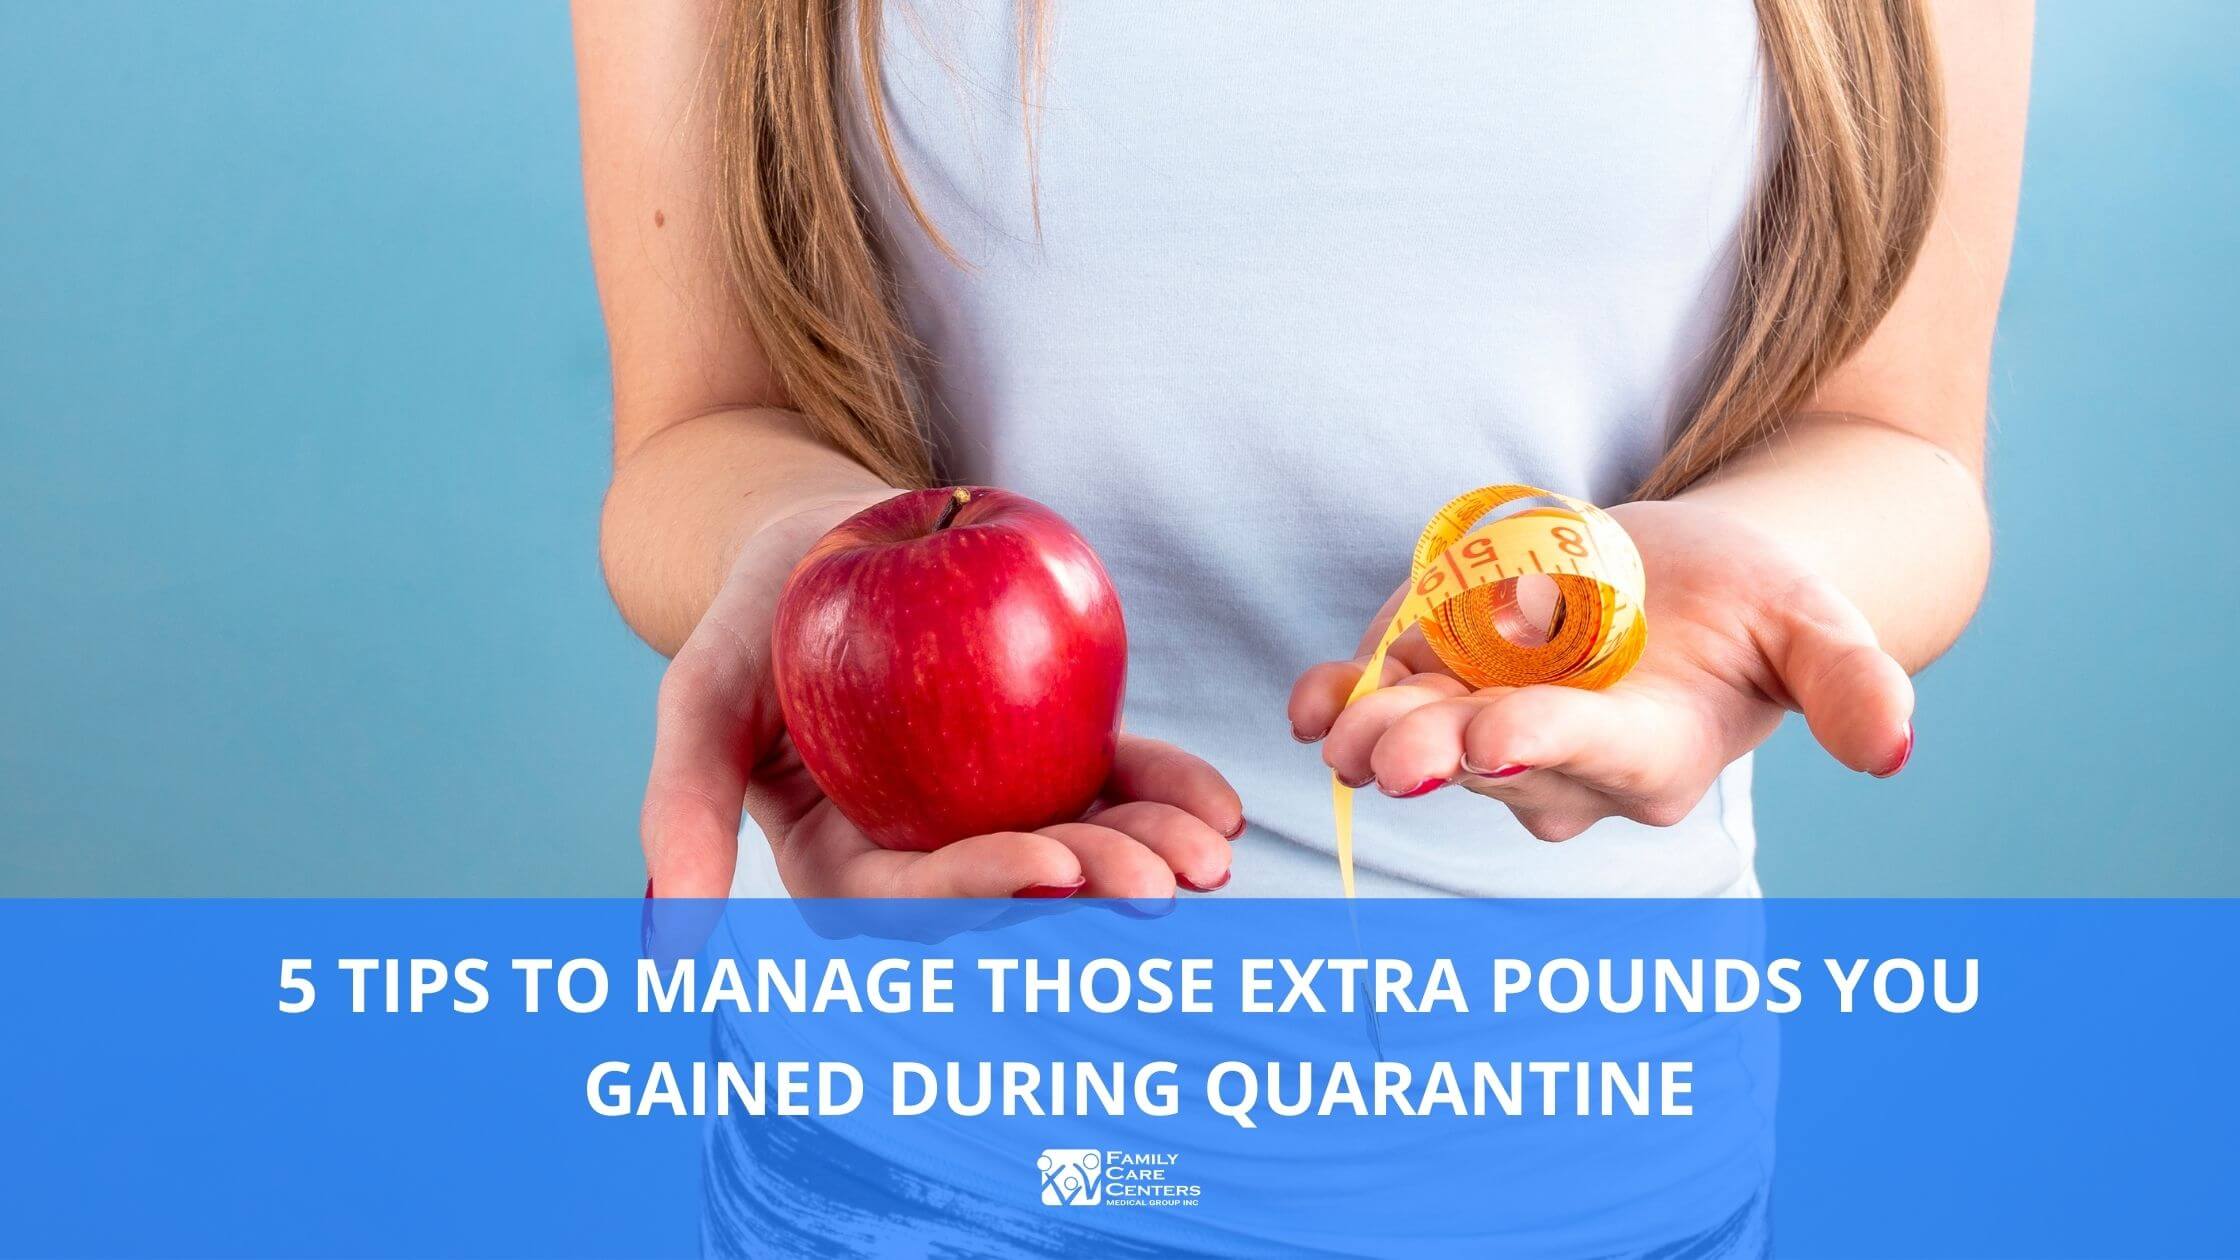 5 Tips to Manage Those Extra Pounds You Gained During Quarantine